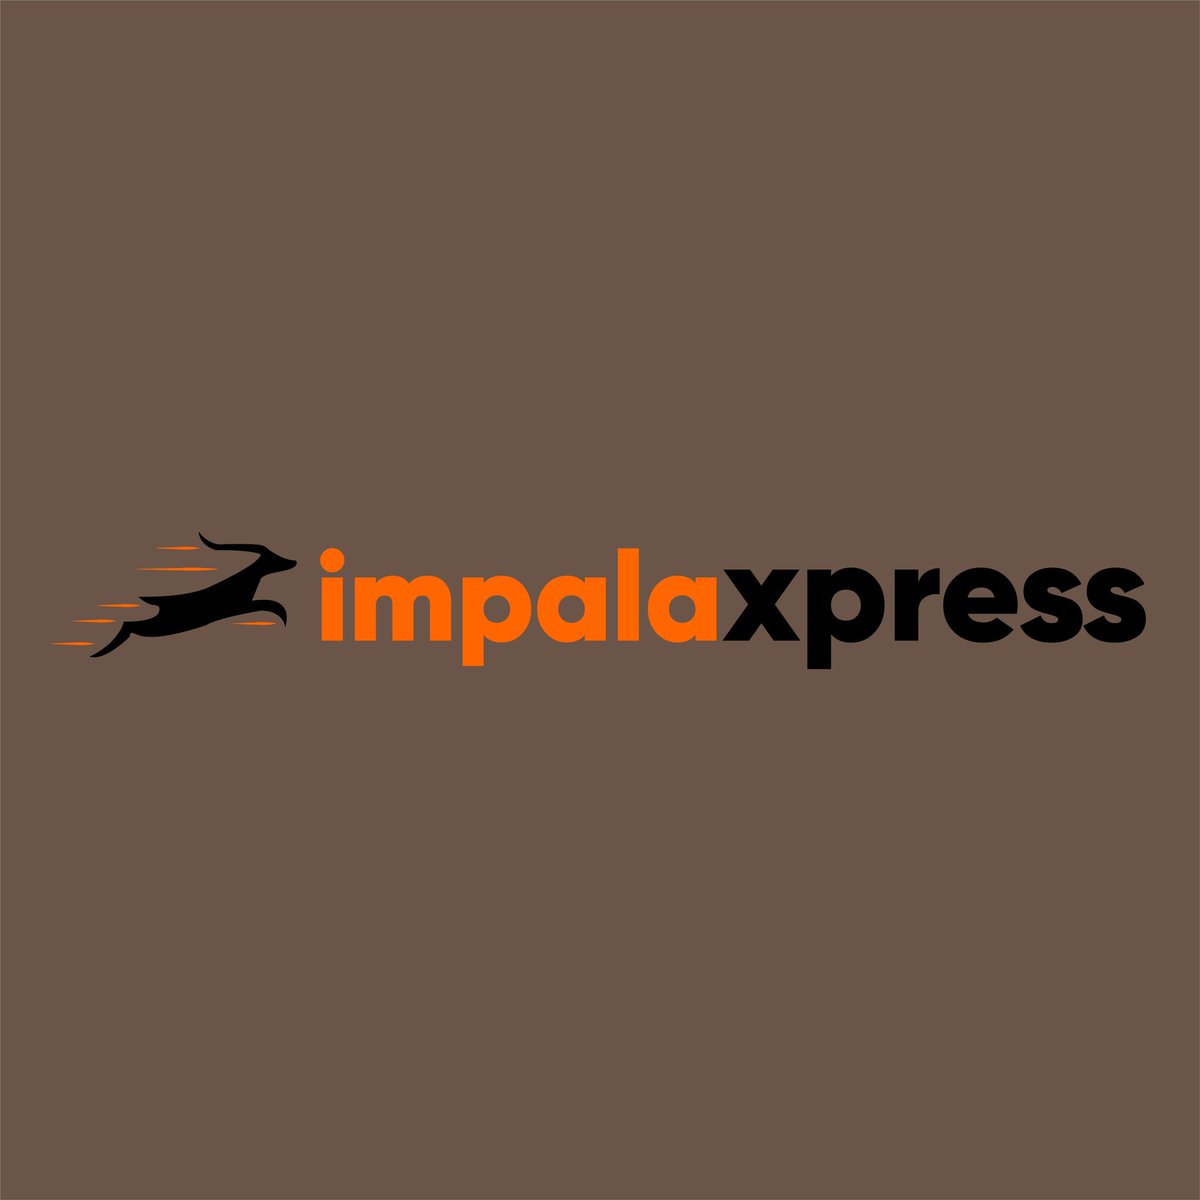 Hey twitter, this is my first design of the year. A brand Identity design for Impala Xpress - A fictional logistics company.

#LogoDesign #identitydesign #branddesigner #logo #logobranding #branding #logodesigner #logodesigns  #logistics #graphicdesign #illustrator